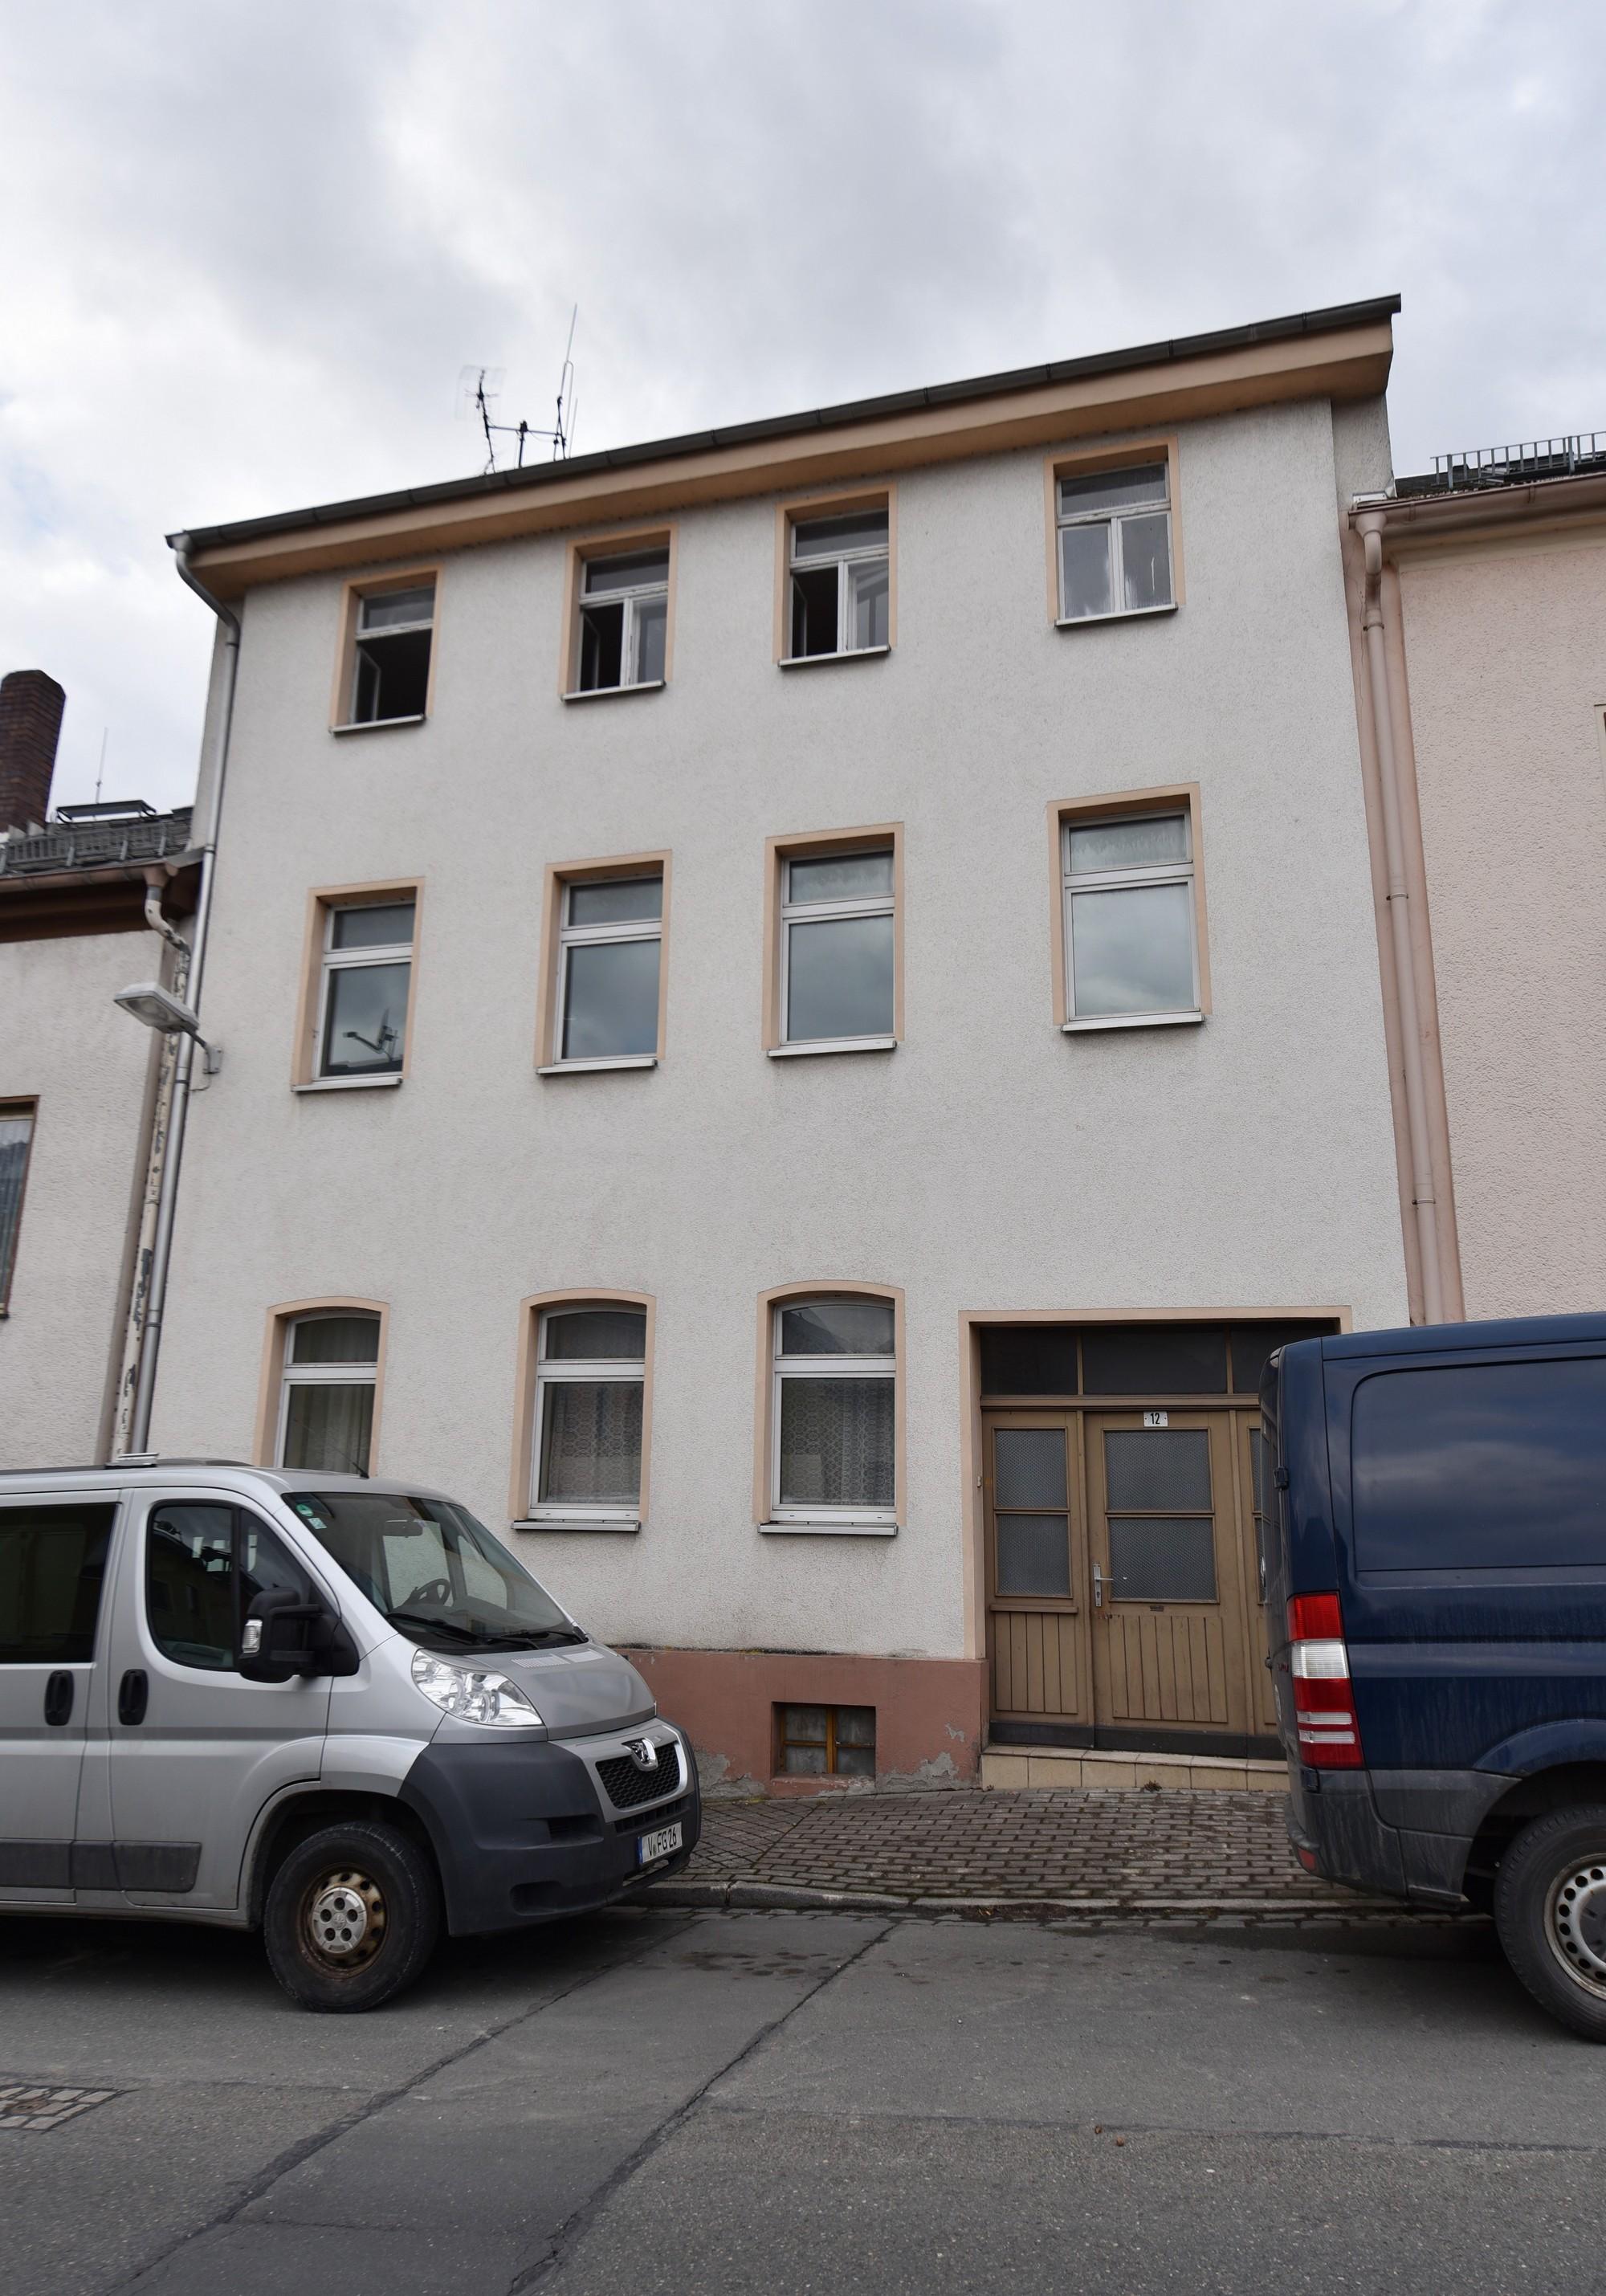 Large family home with 5 bedrooms in Pausa, Germany with granny flat - Freehold Title